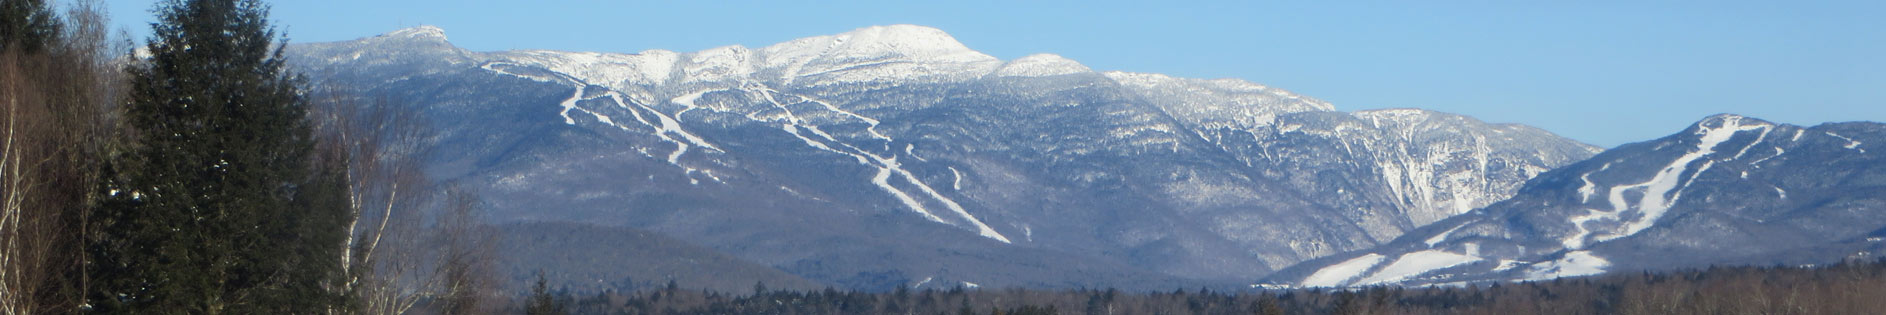 Snow covered Mt. Mansfield